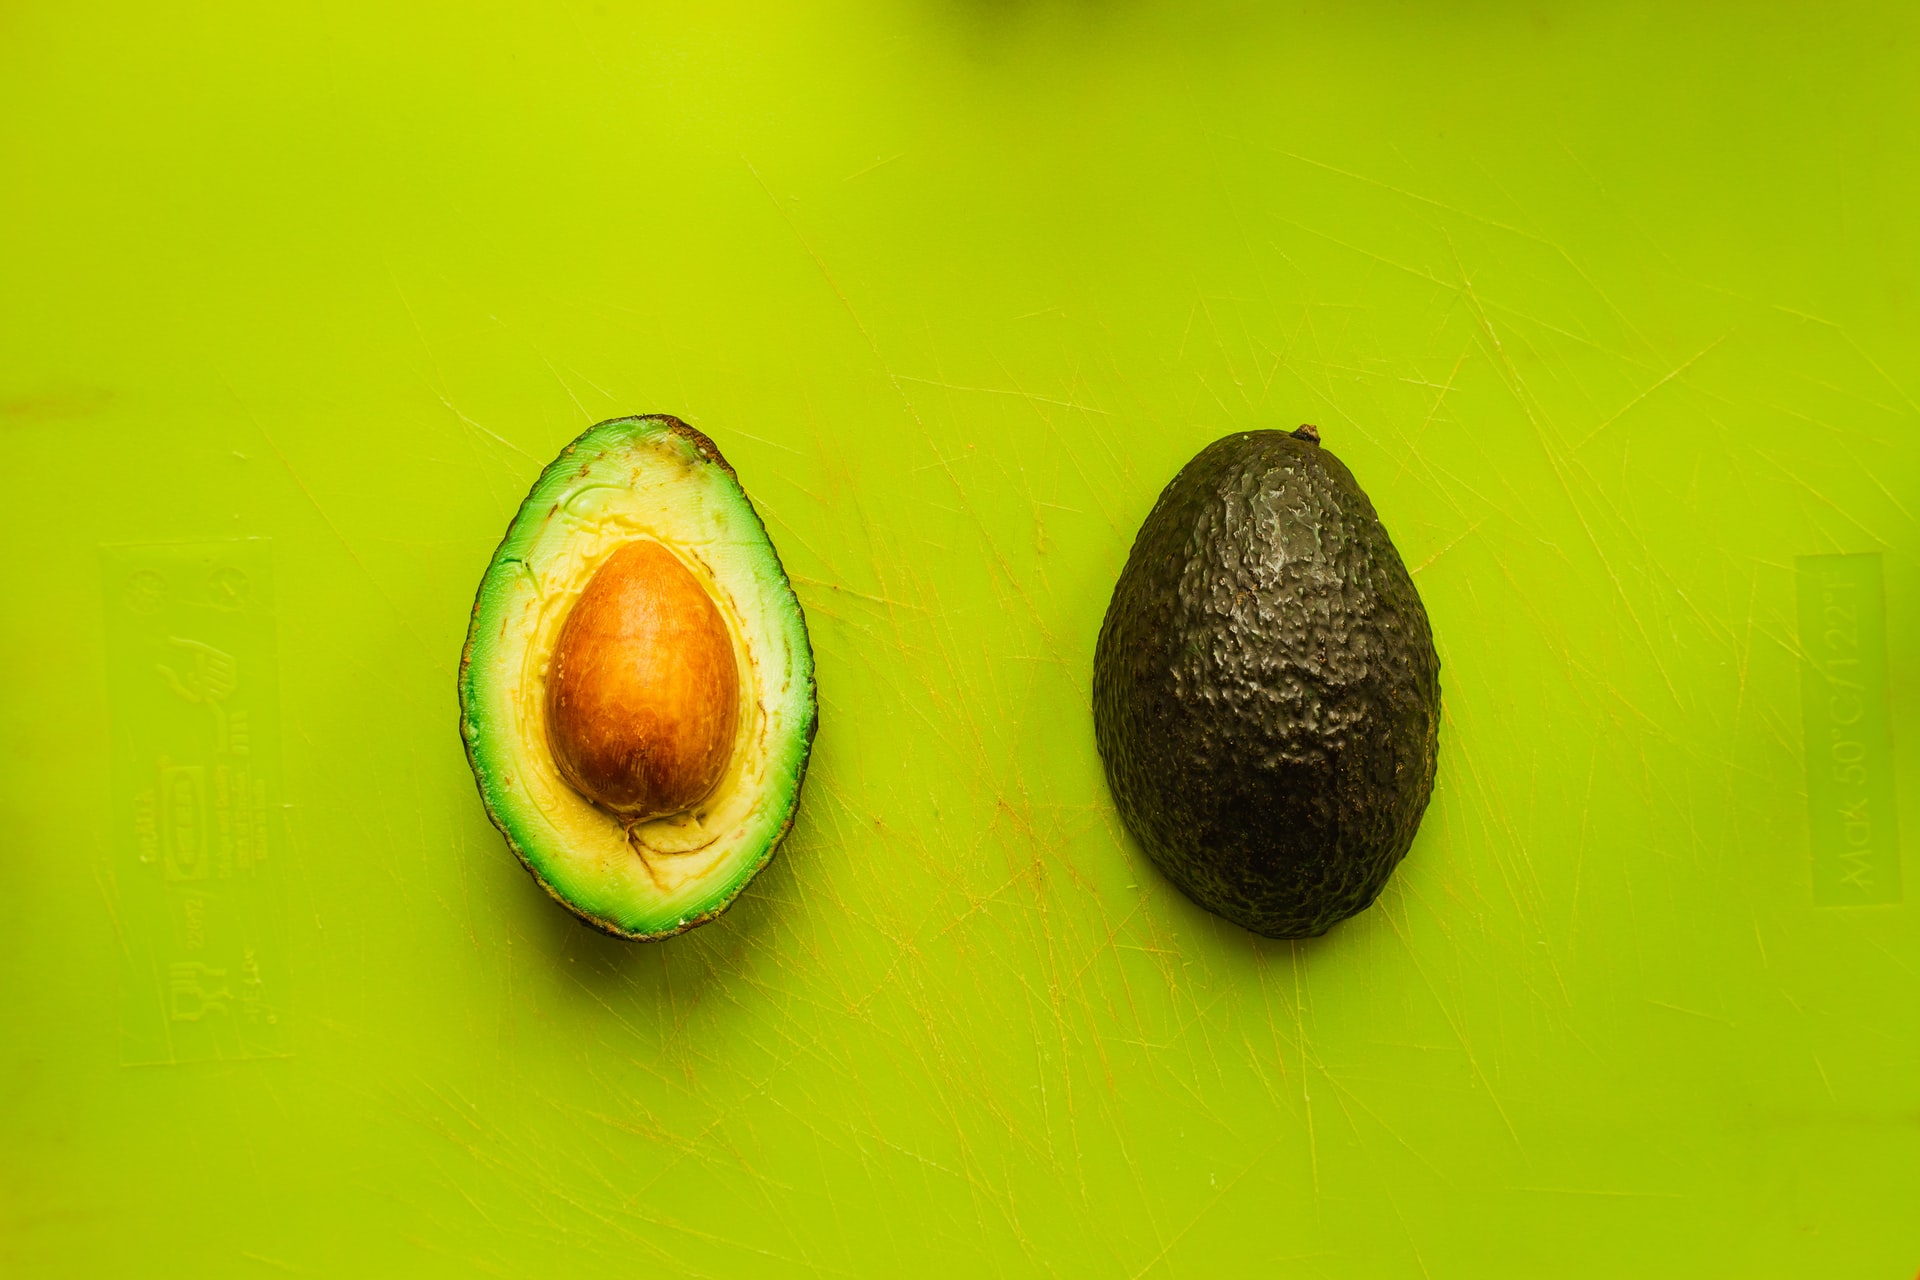 How to Plant Your First Avocado During Quarantine 13